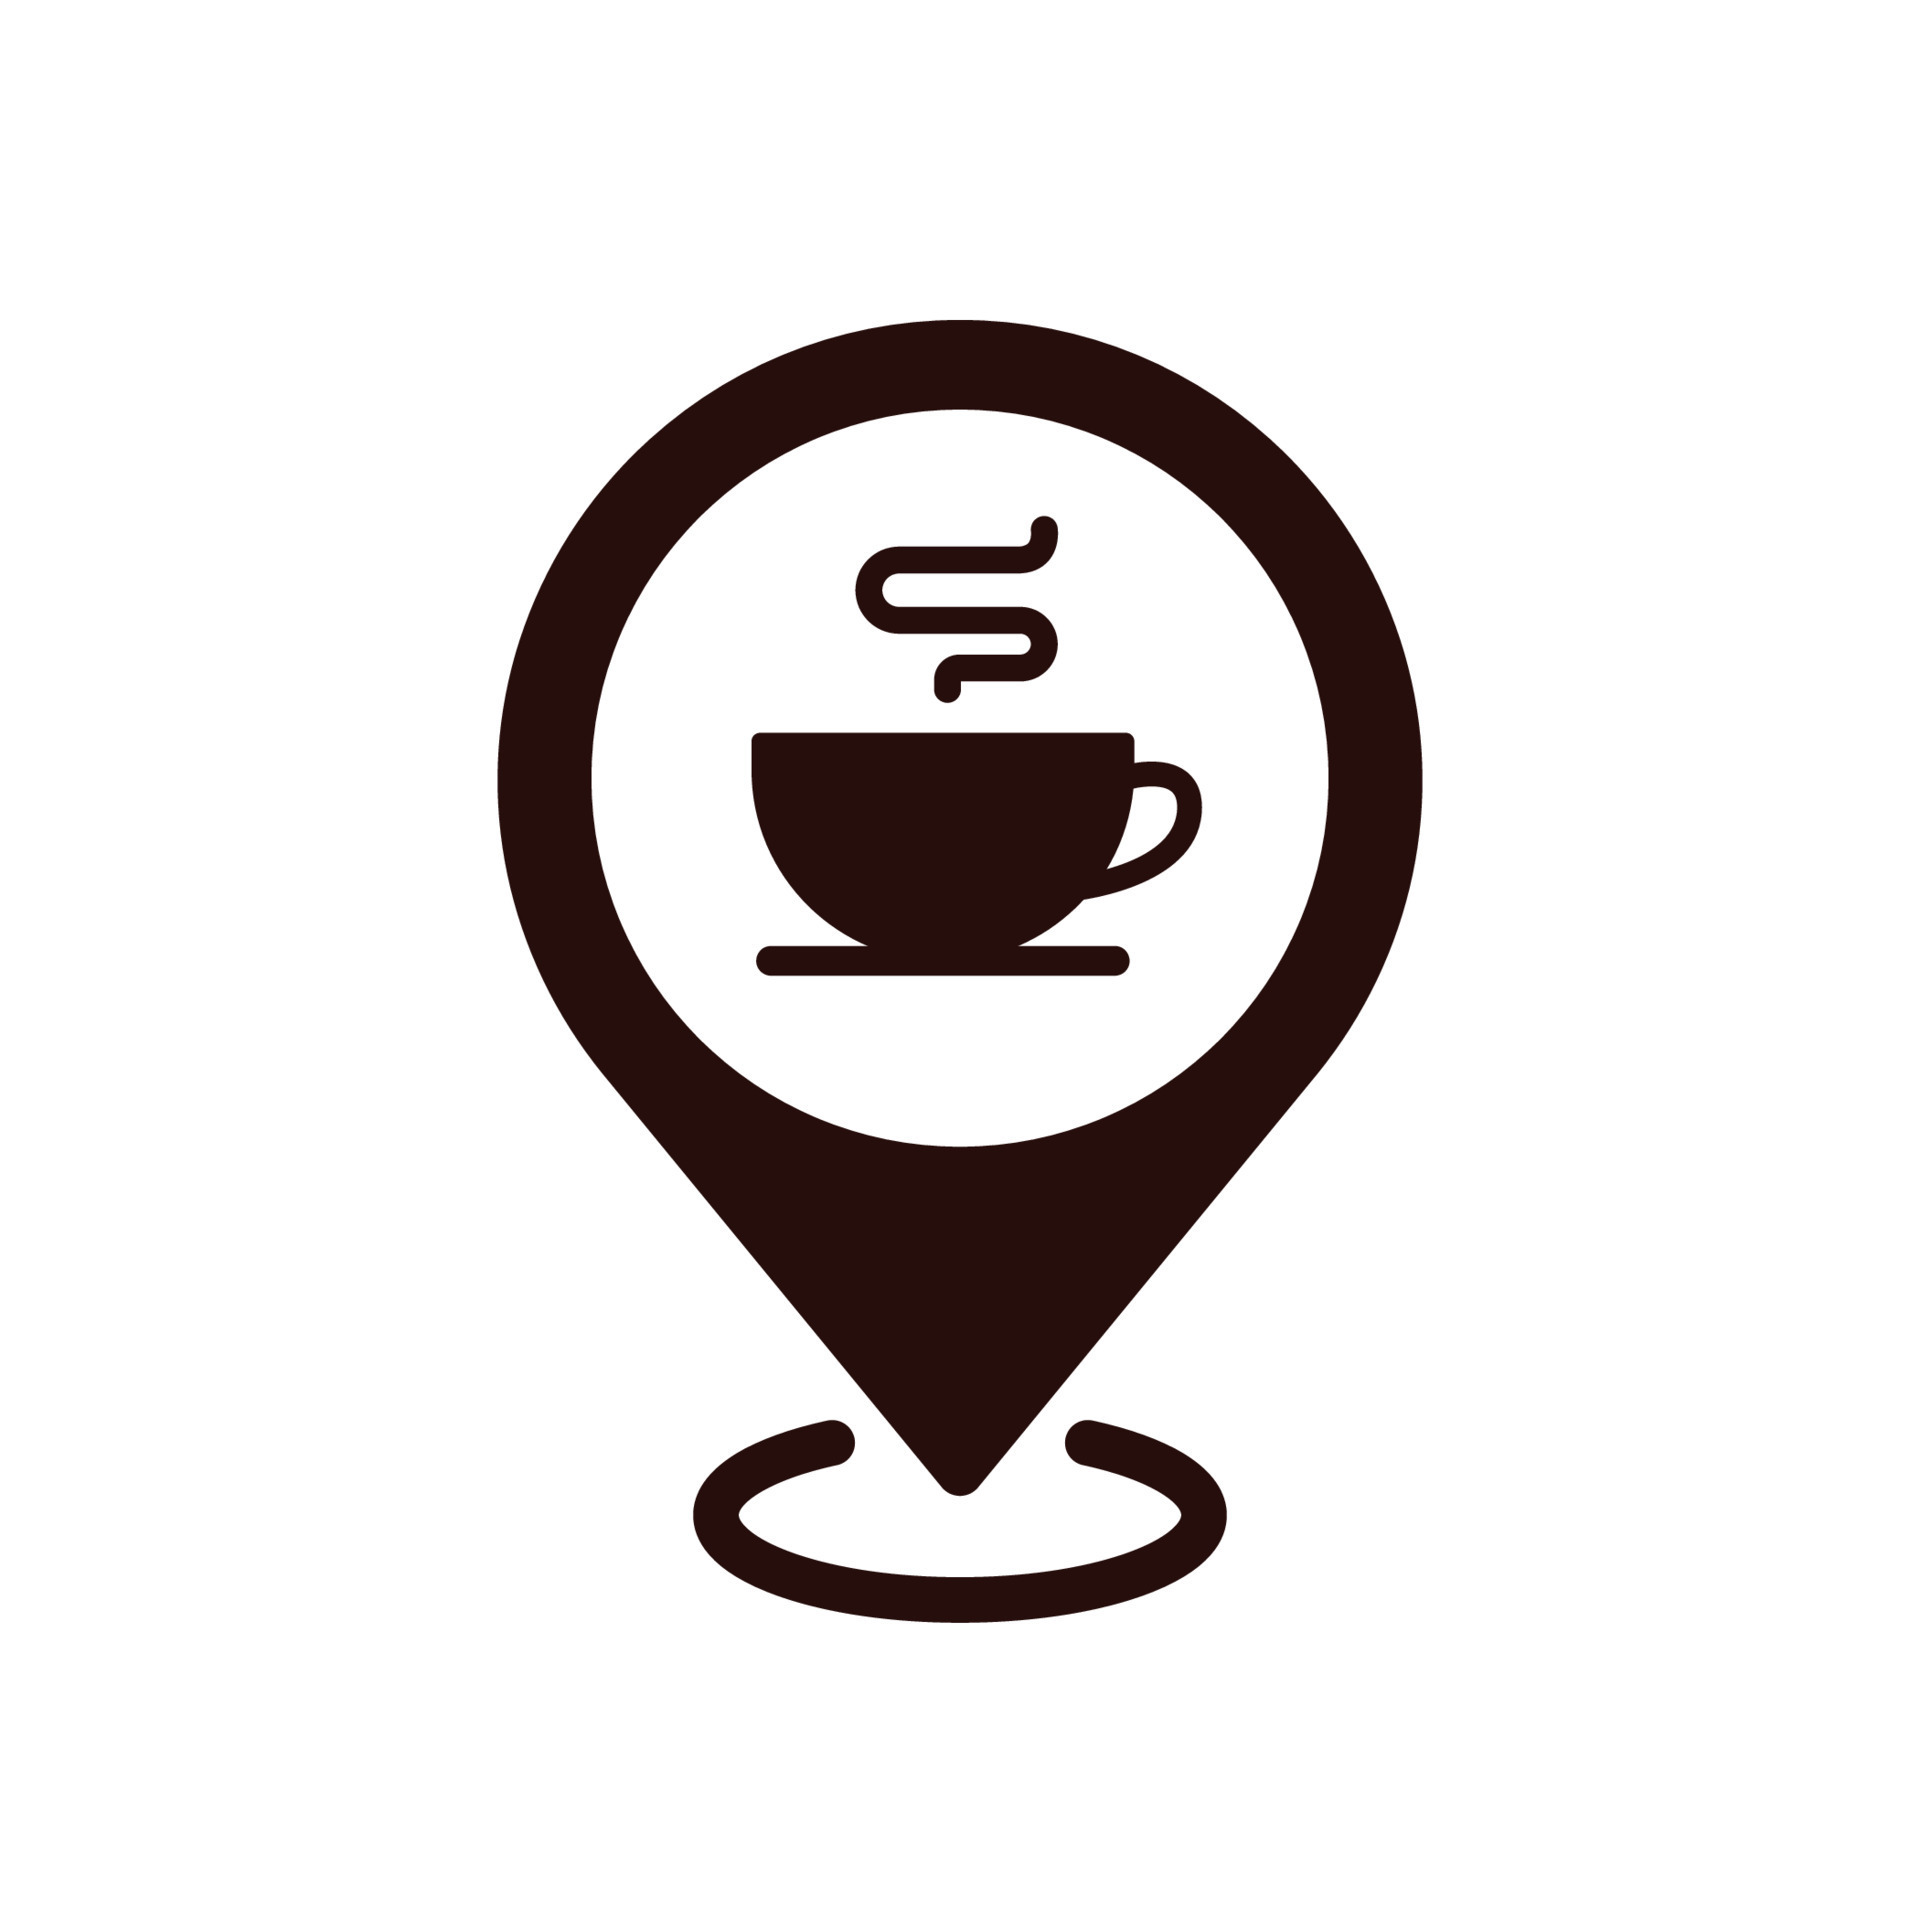 https://static.vecteezy.com/system/resources/previews/012/397/049/original/coffee-shop-location-pin-icon-illustration-vector.jpg